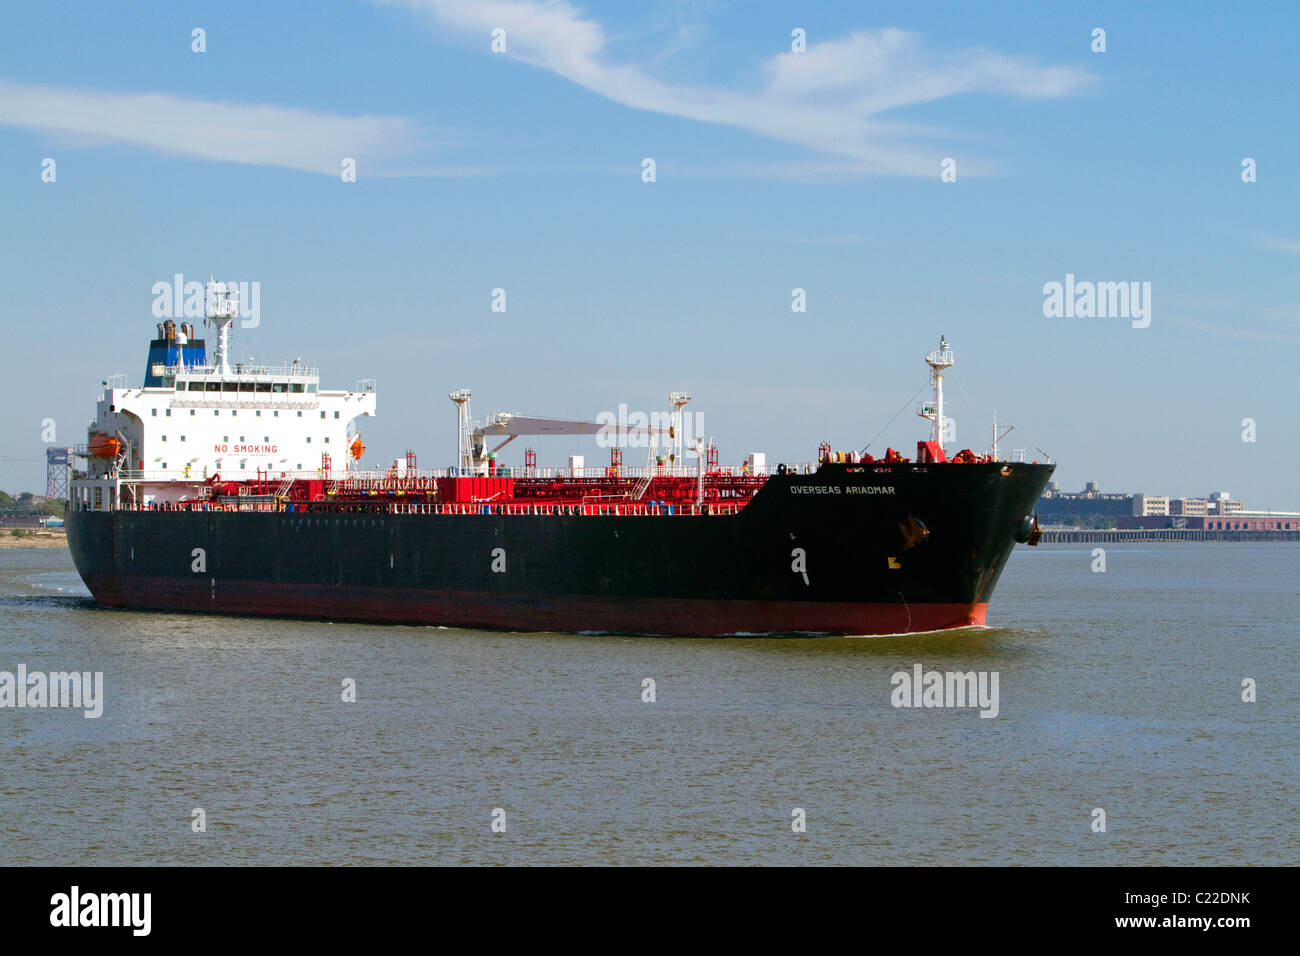 Tanker ship transporting petroleum on the Mississippi River at New Orleans, Louisiana, USA. Stock Photo